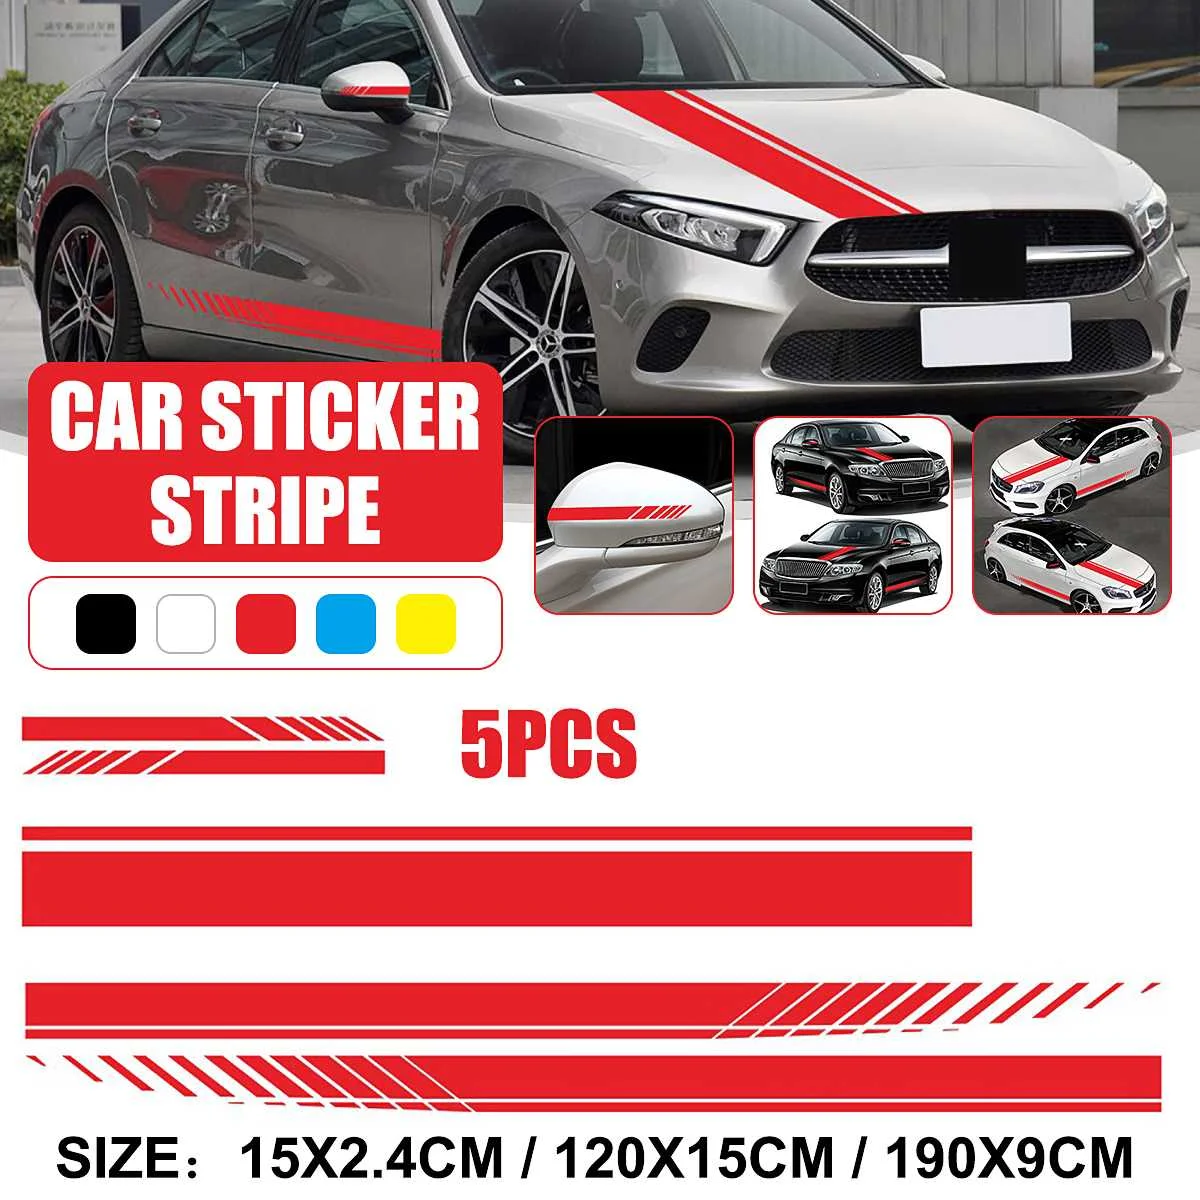 

5pcs Car Racing Stripes Side Auto Body Decals Door Hood Rearview Mirror Stickers Cover For Toyota/BMW/Audi/VW/Benz